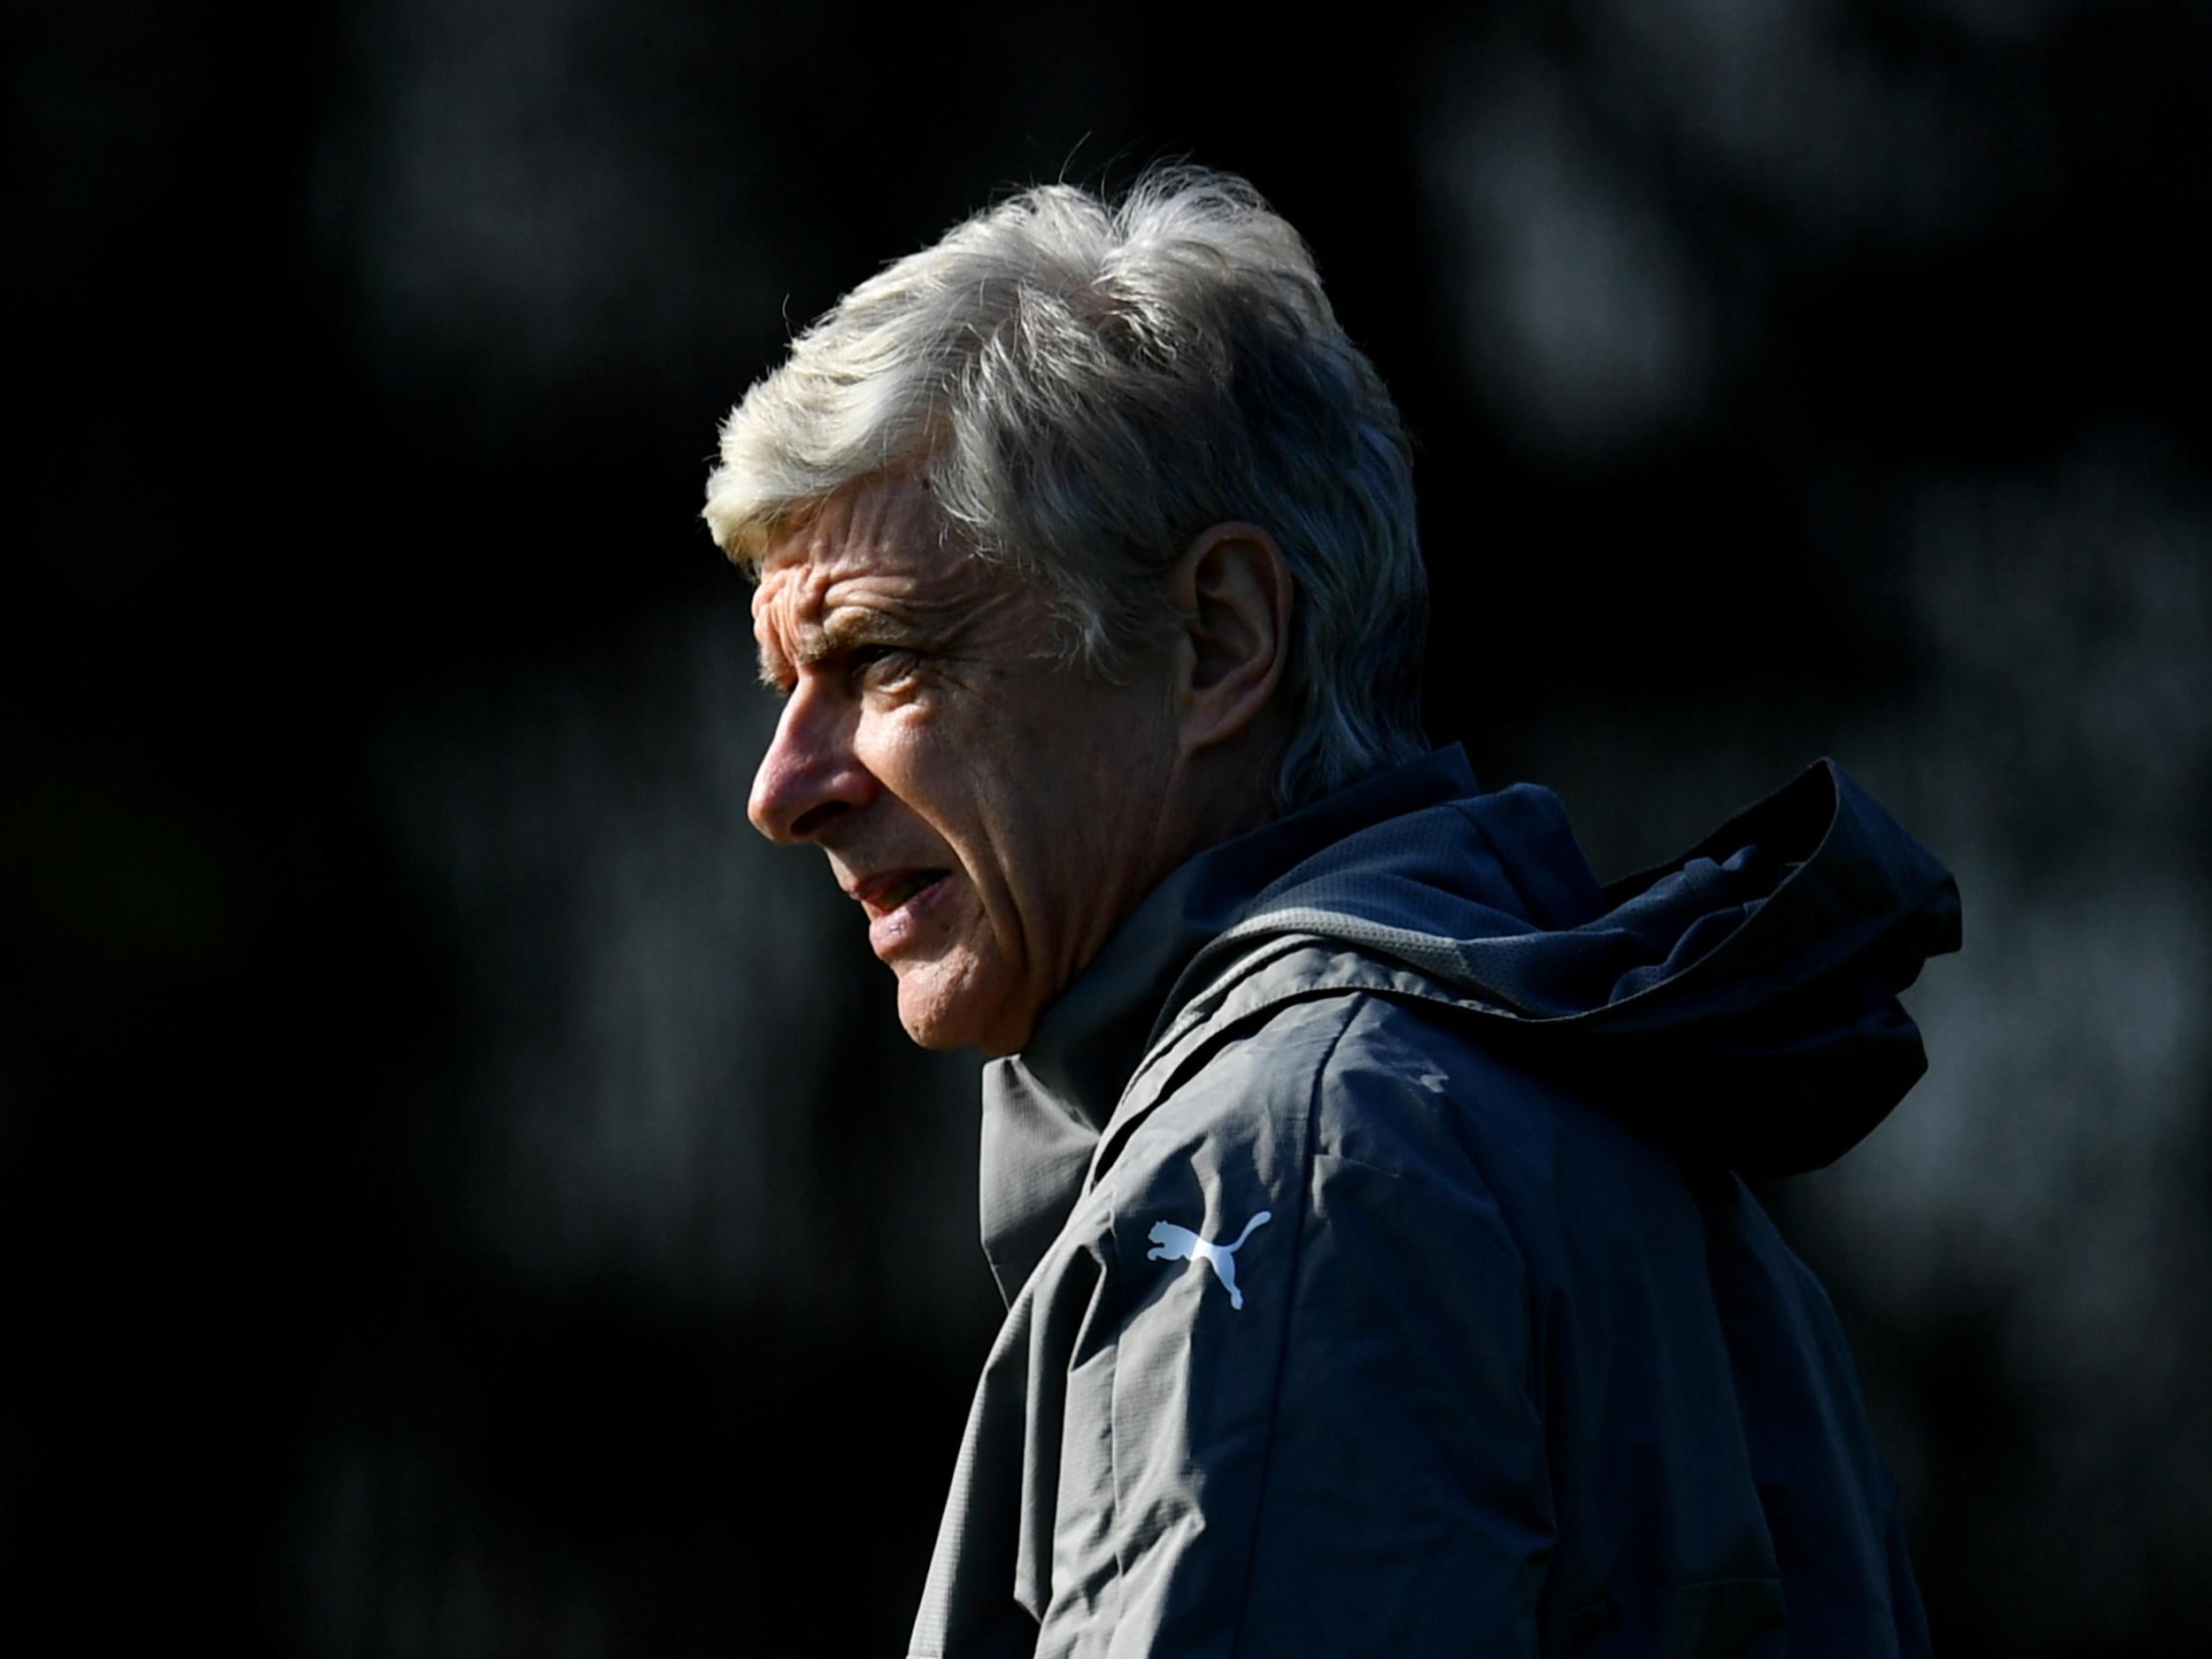 Wenger does not want 'one or two' bad results to cloud his thinking